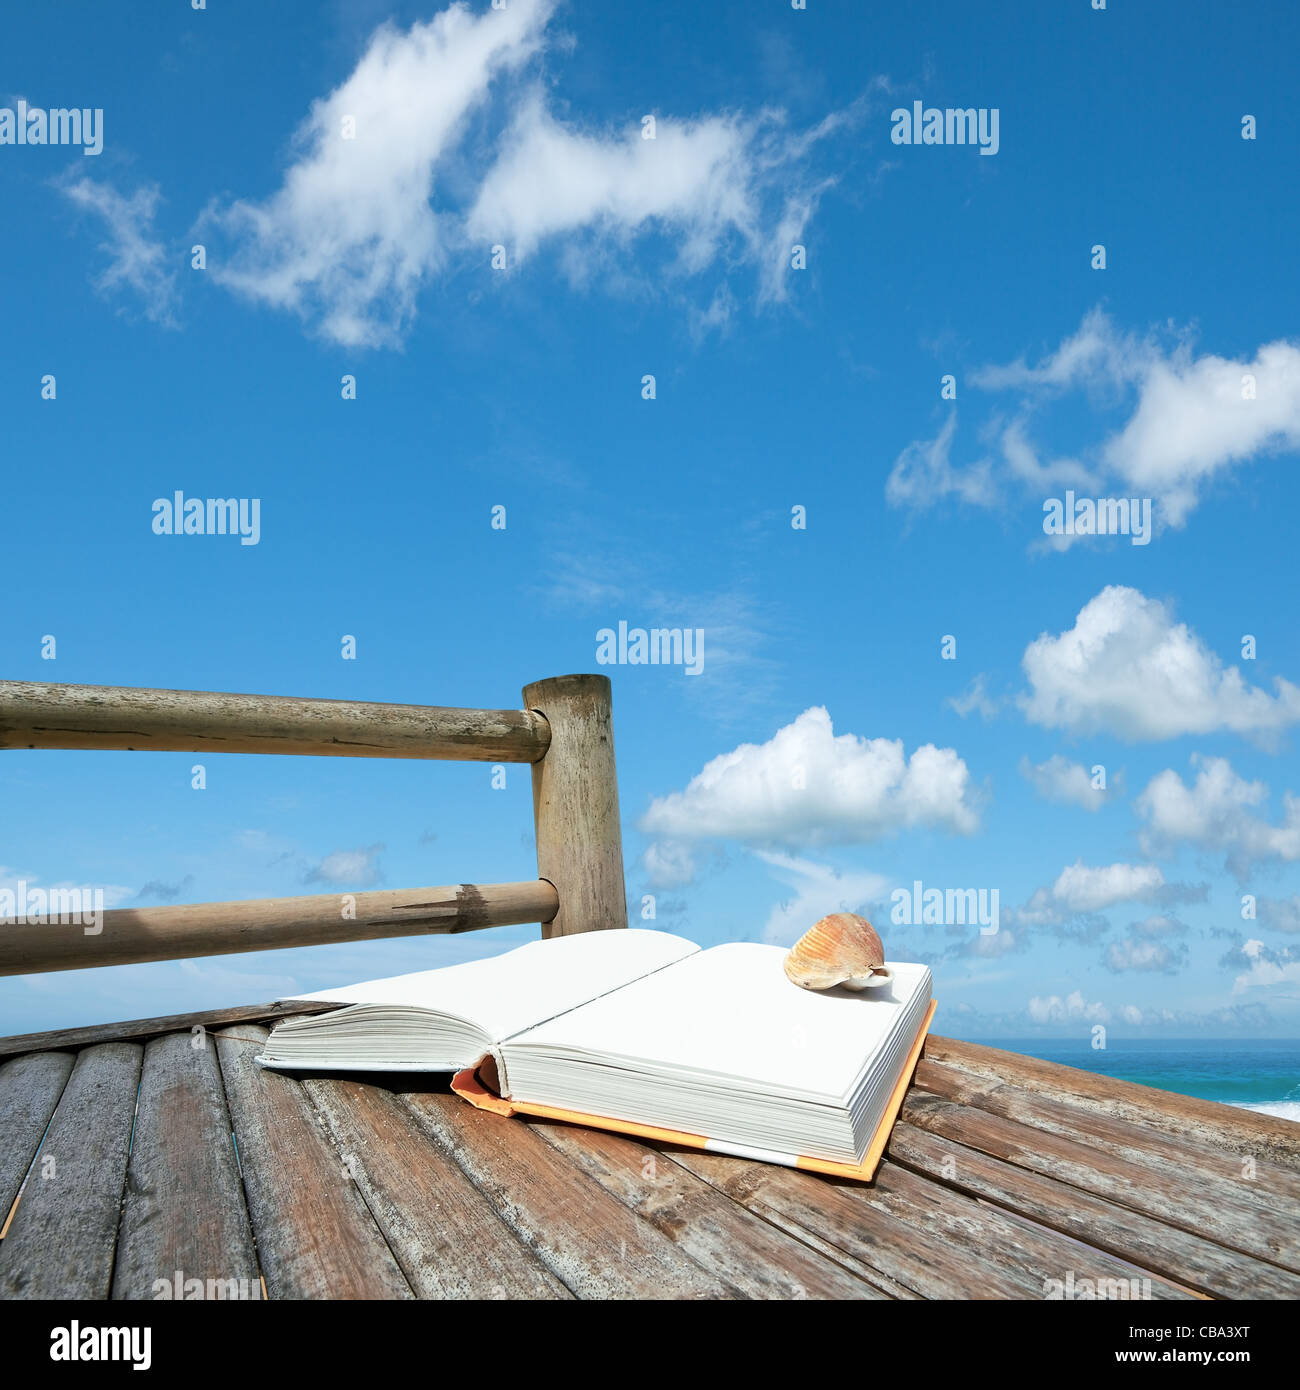 Book with a seashell on the bamboo chair at the beach. Square composition. Stock Photo